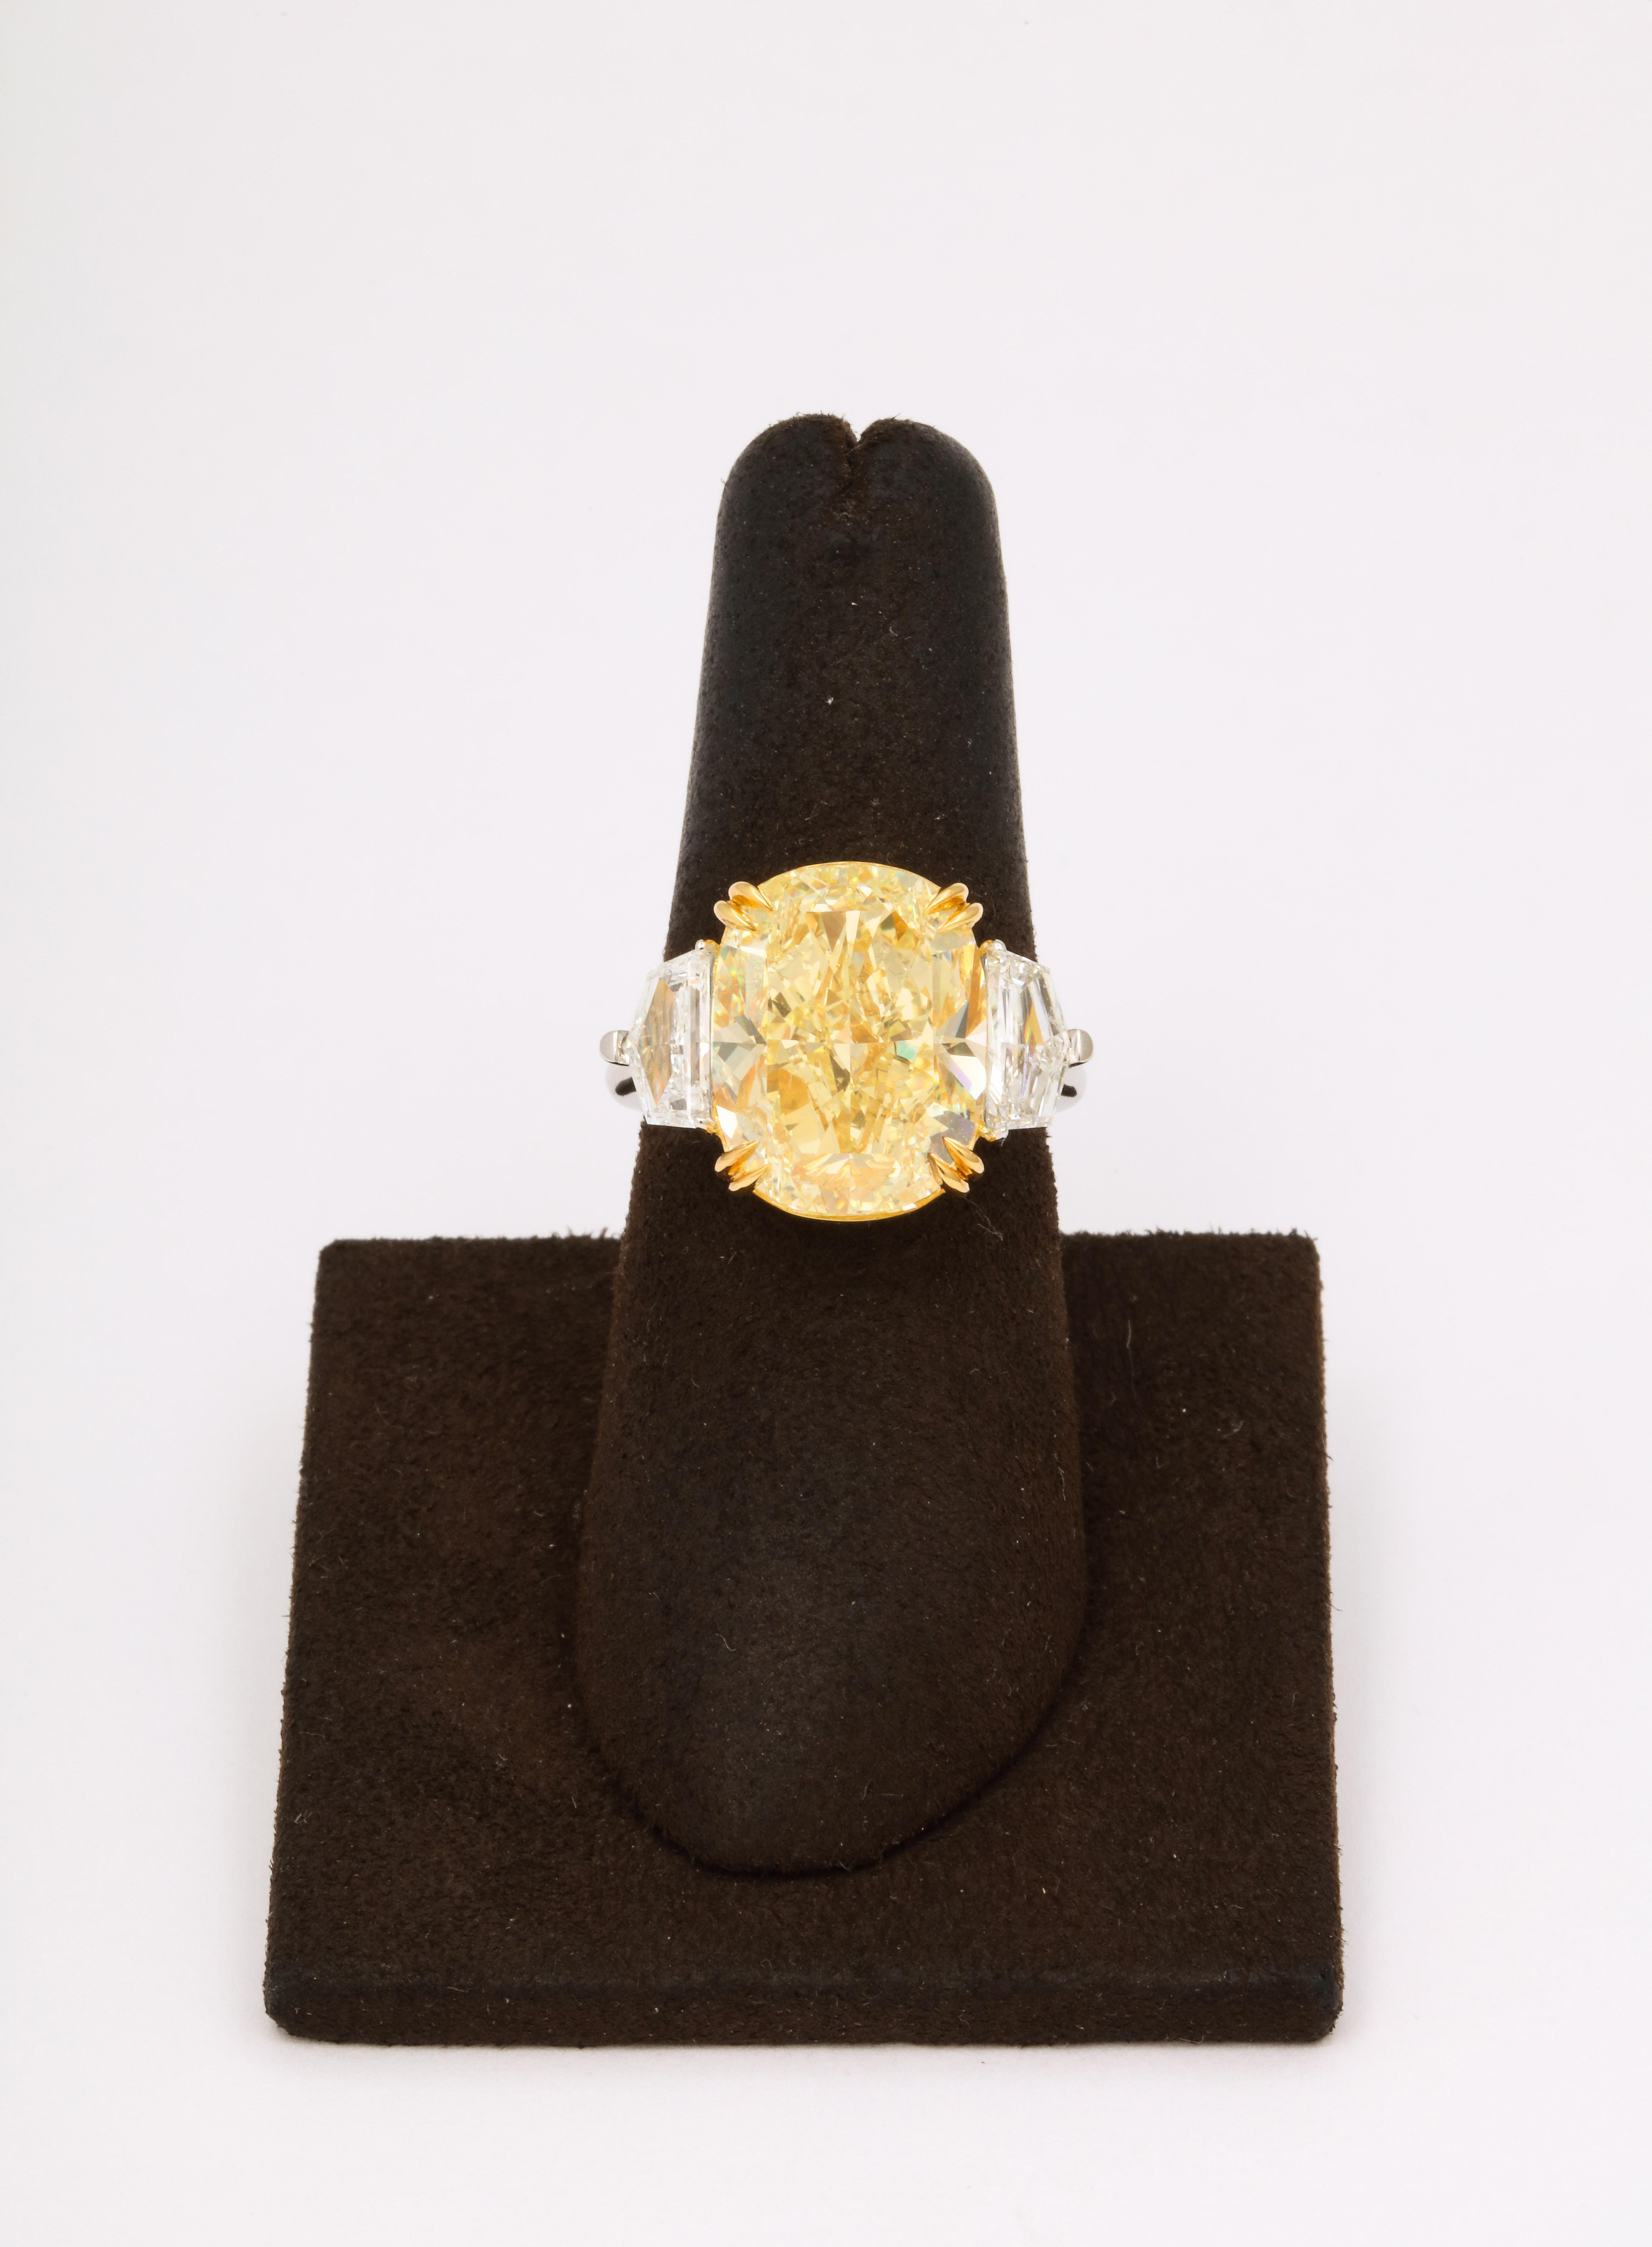 
An INCREDIBLE rock! 

10.01 carat GIA certified Fancy Yellow, VS1 cushion cut center diamond. 

Set with 1.61 carats of white side diamonds. 

The center diamond measures 14.64 x 11.54 mm!

Custom Platinum and 18k yellow gold mounting. 

Currently